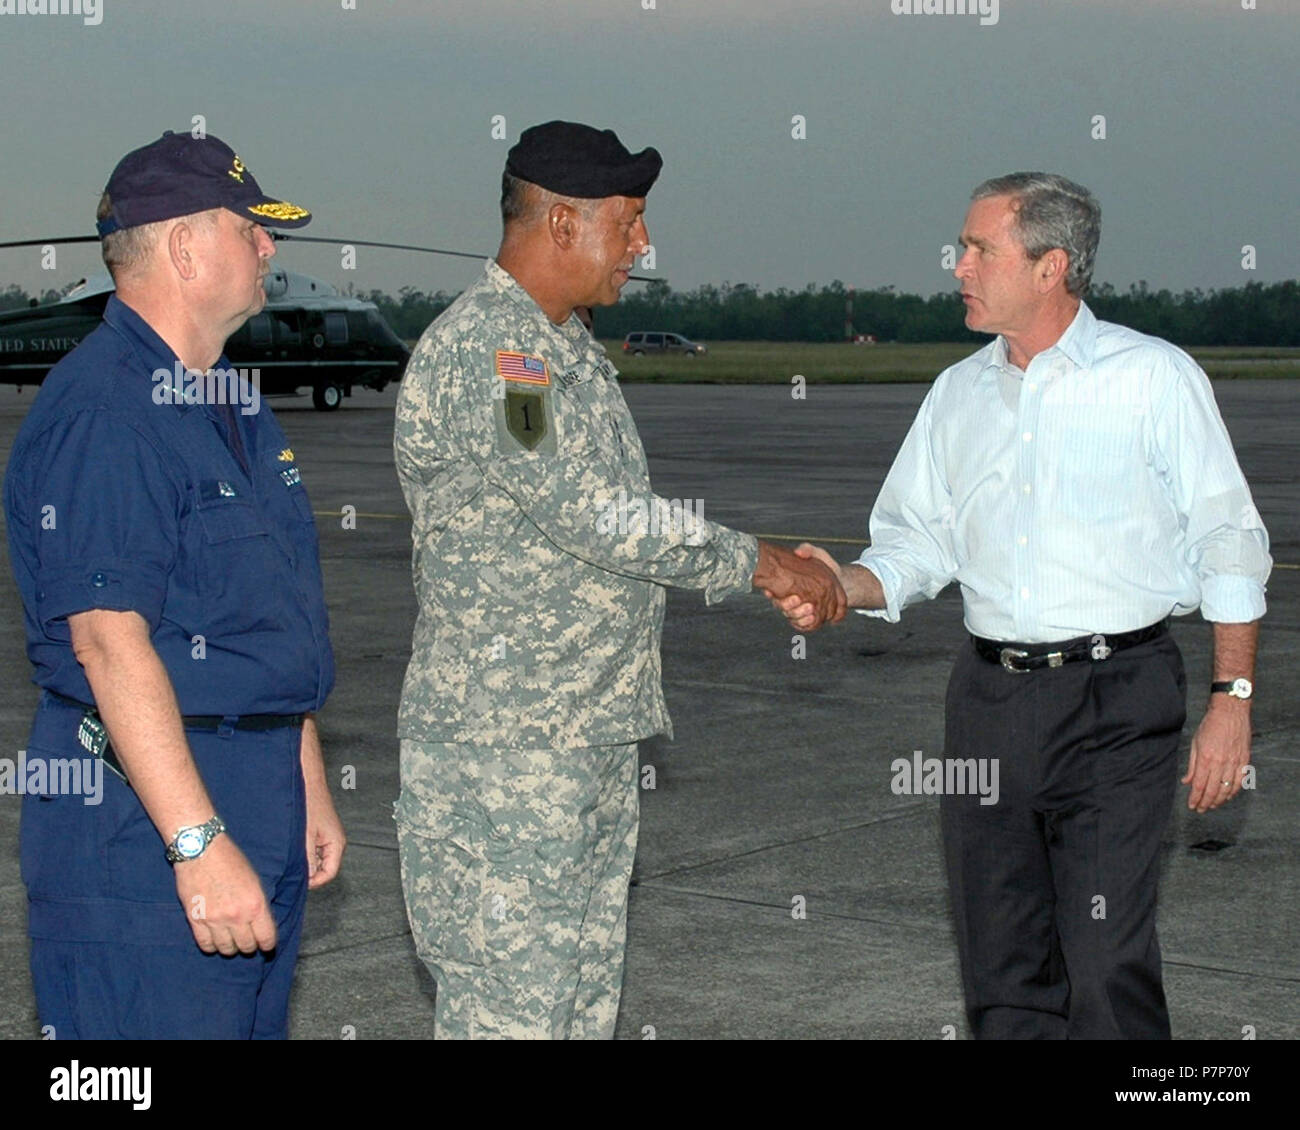 Hurricane Relief-24. US President George W. Bush (right) greets US Army (USA) Lieutenant General (LGEN) Russel L. Honore, Commander, Joint Task Force (JTF) Katrina, and US Coast Guard (USCG) Vice Admiral (VADM) Thad W. Allen, Director of Federal Emergency Management Agency (FEMA) Relief Efforts, on board Naval Air Station, Joint Reserve Base, (NAS JRB) New Orleans. President Bush and the first lady are meeting with top ranking military officials at NAS JRB, New Orleans to receive briefs on JTF Katrina relief efforts. The Navy's active participation in the Hurricane Katrina humanitarian assista Stock Photo